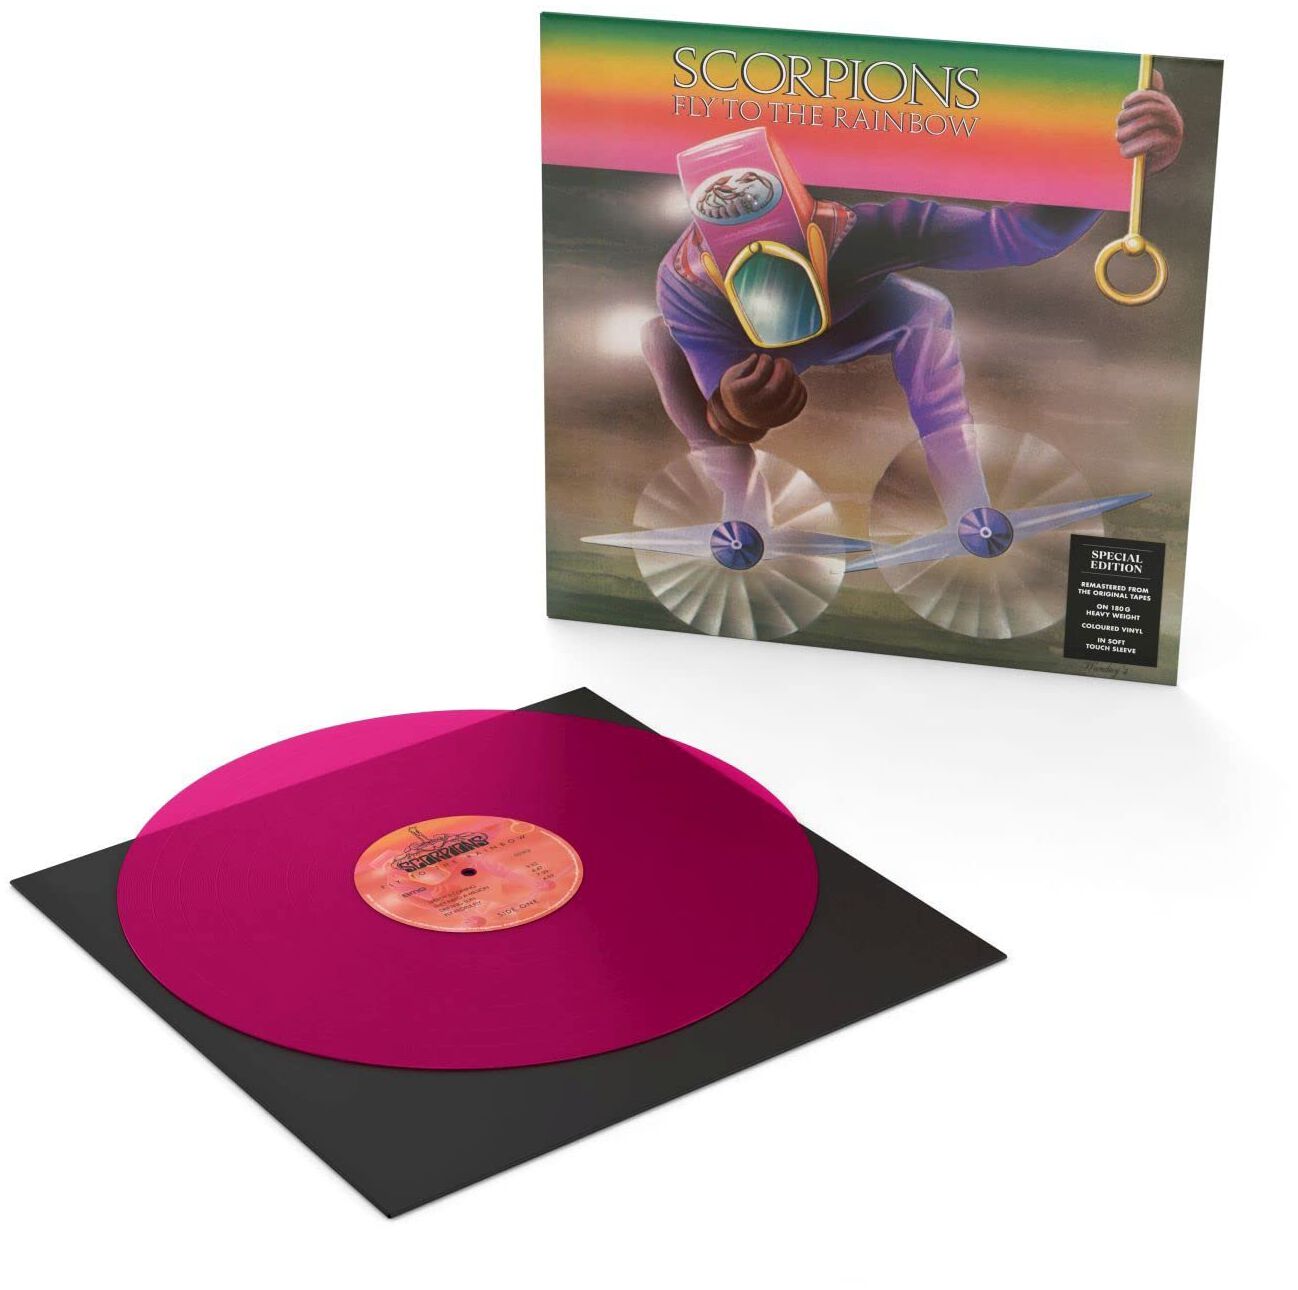 Fly to the rainbow von Scorpions - LP (Coloured, Special Edition, Standard)